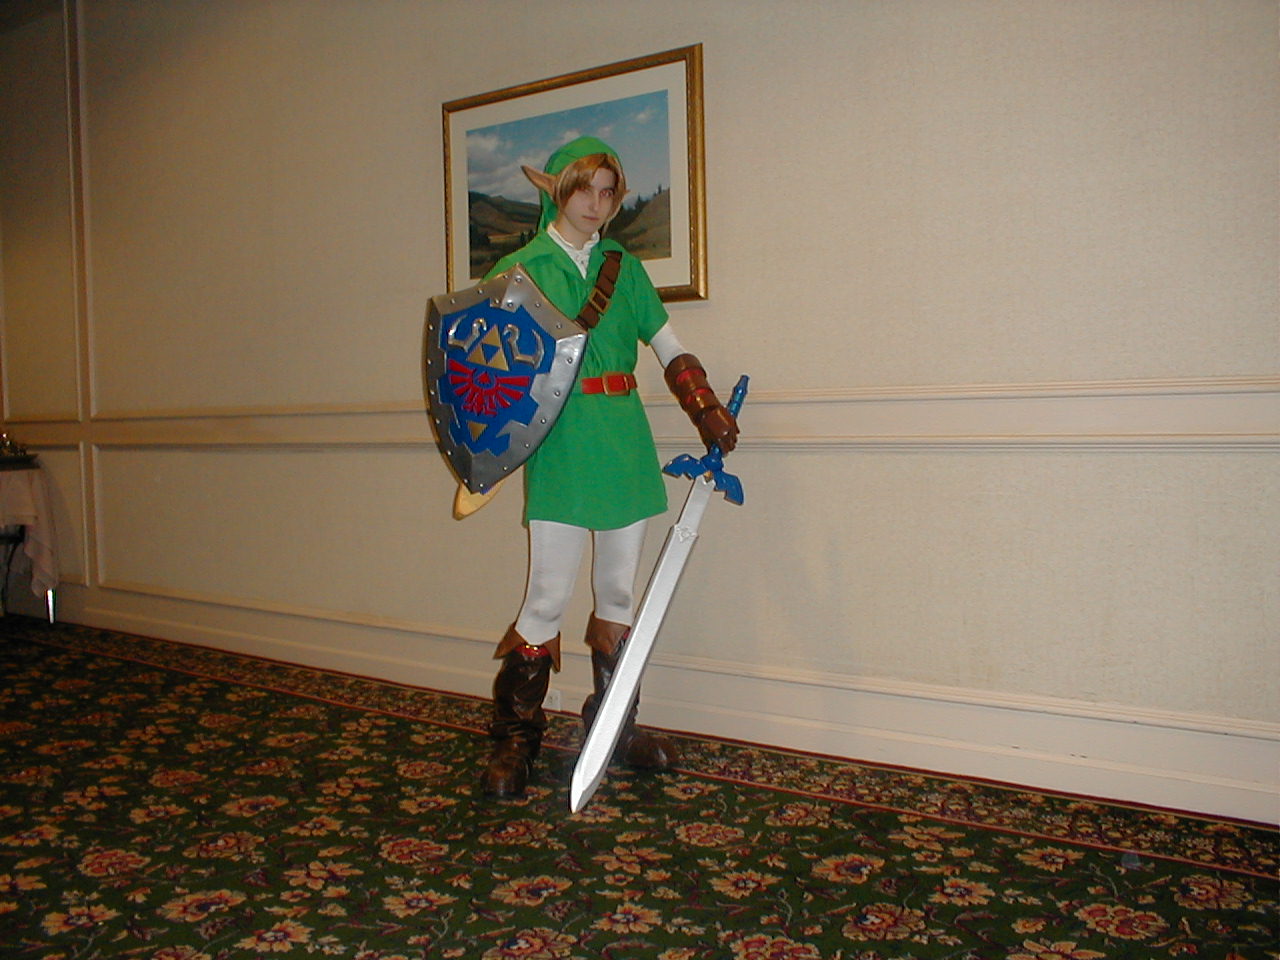 Pikmin Link as Link from The Legend of Zelda: Ocarina of Time